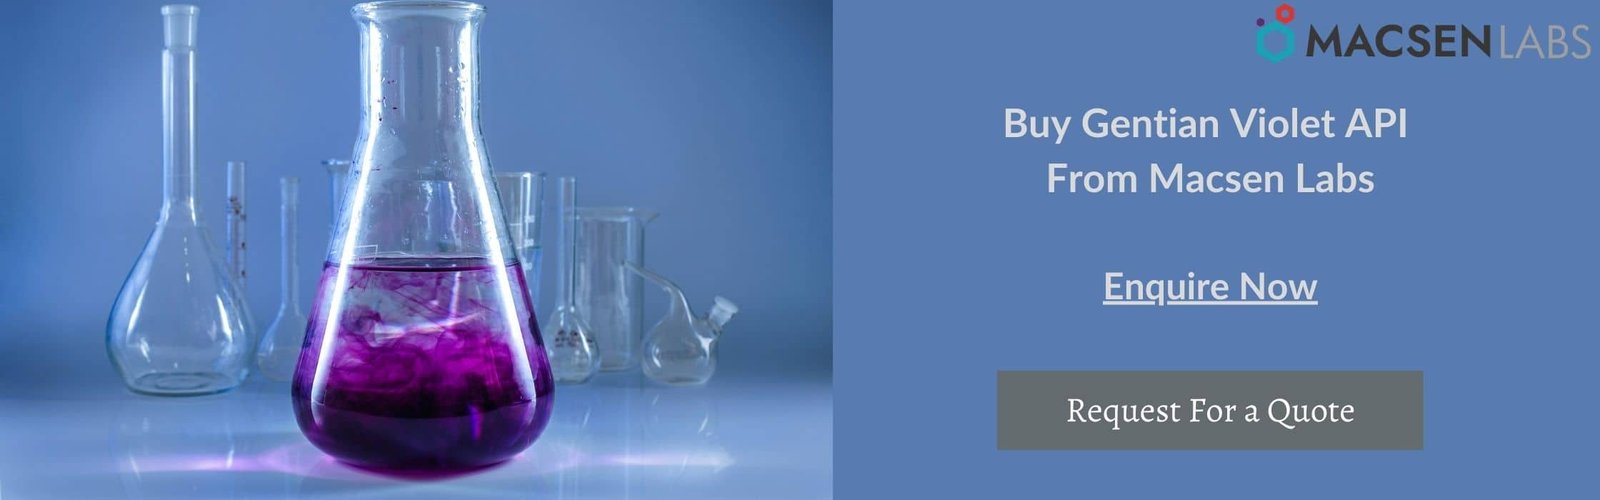 Buy Gentian Violet API From Macsen Labs